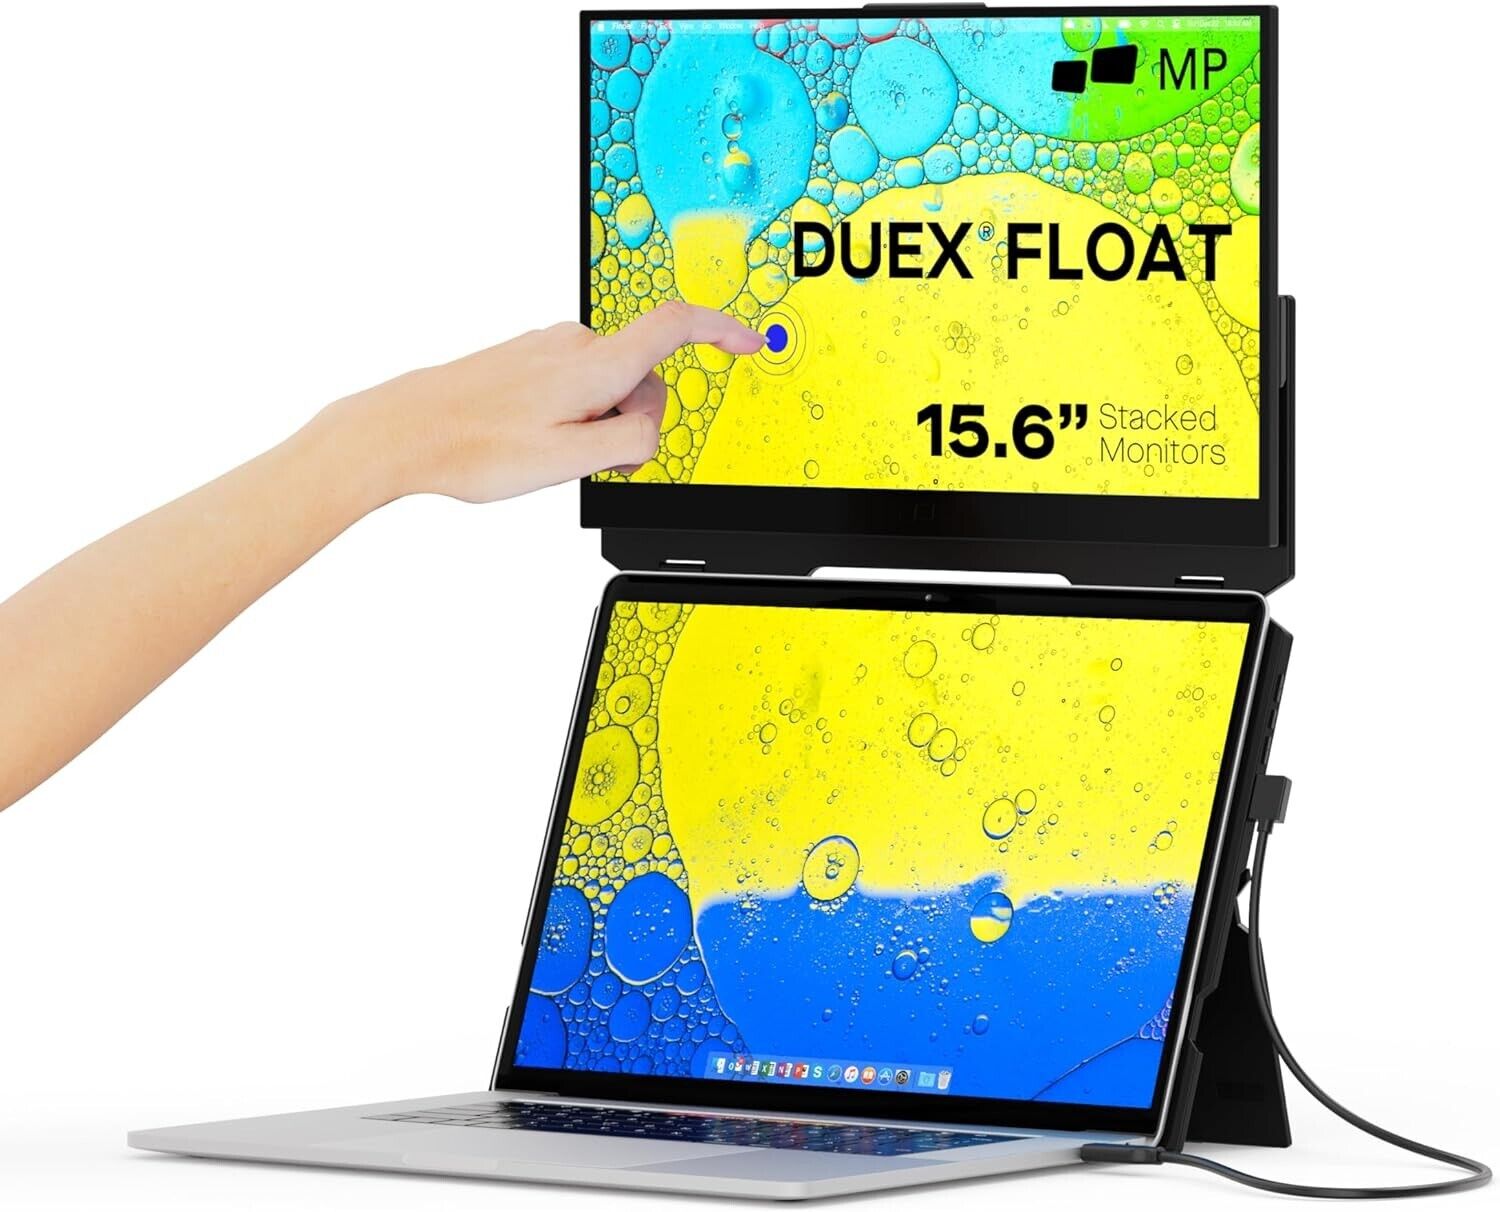 Duex Float Mobile Pixels 15.6 Stacked Portable Screens, Full HD IPS 1080P Touch